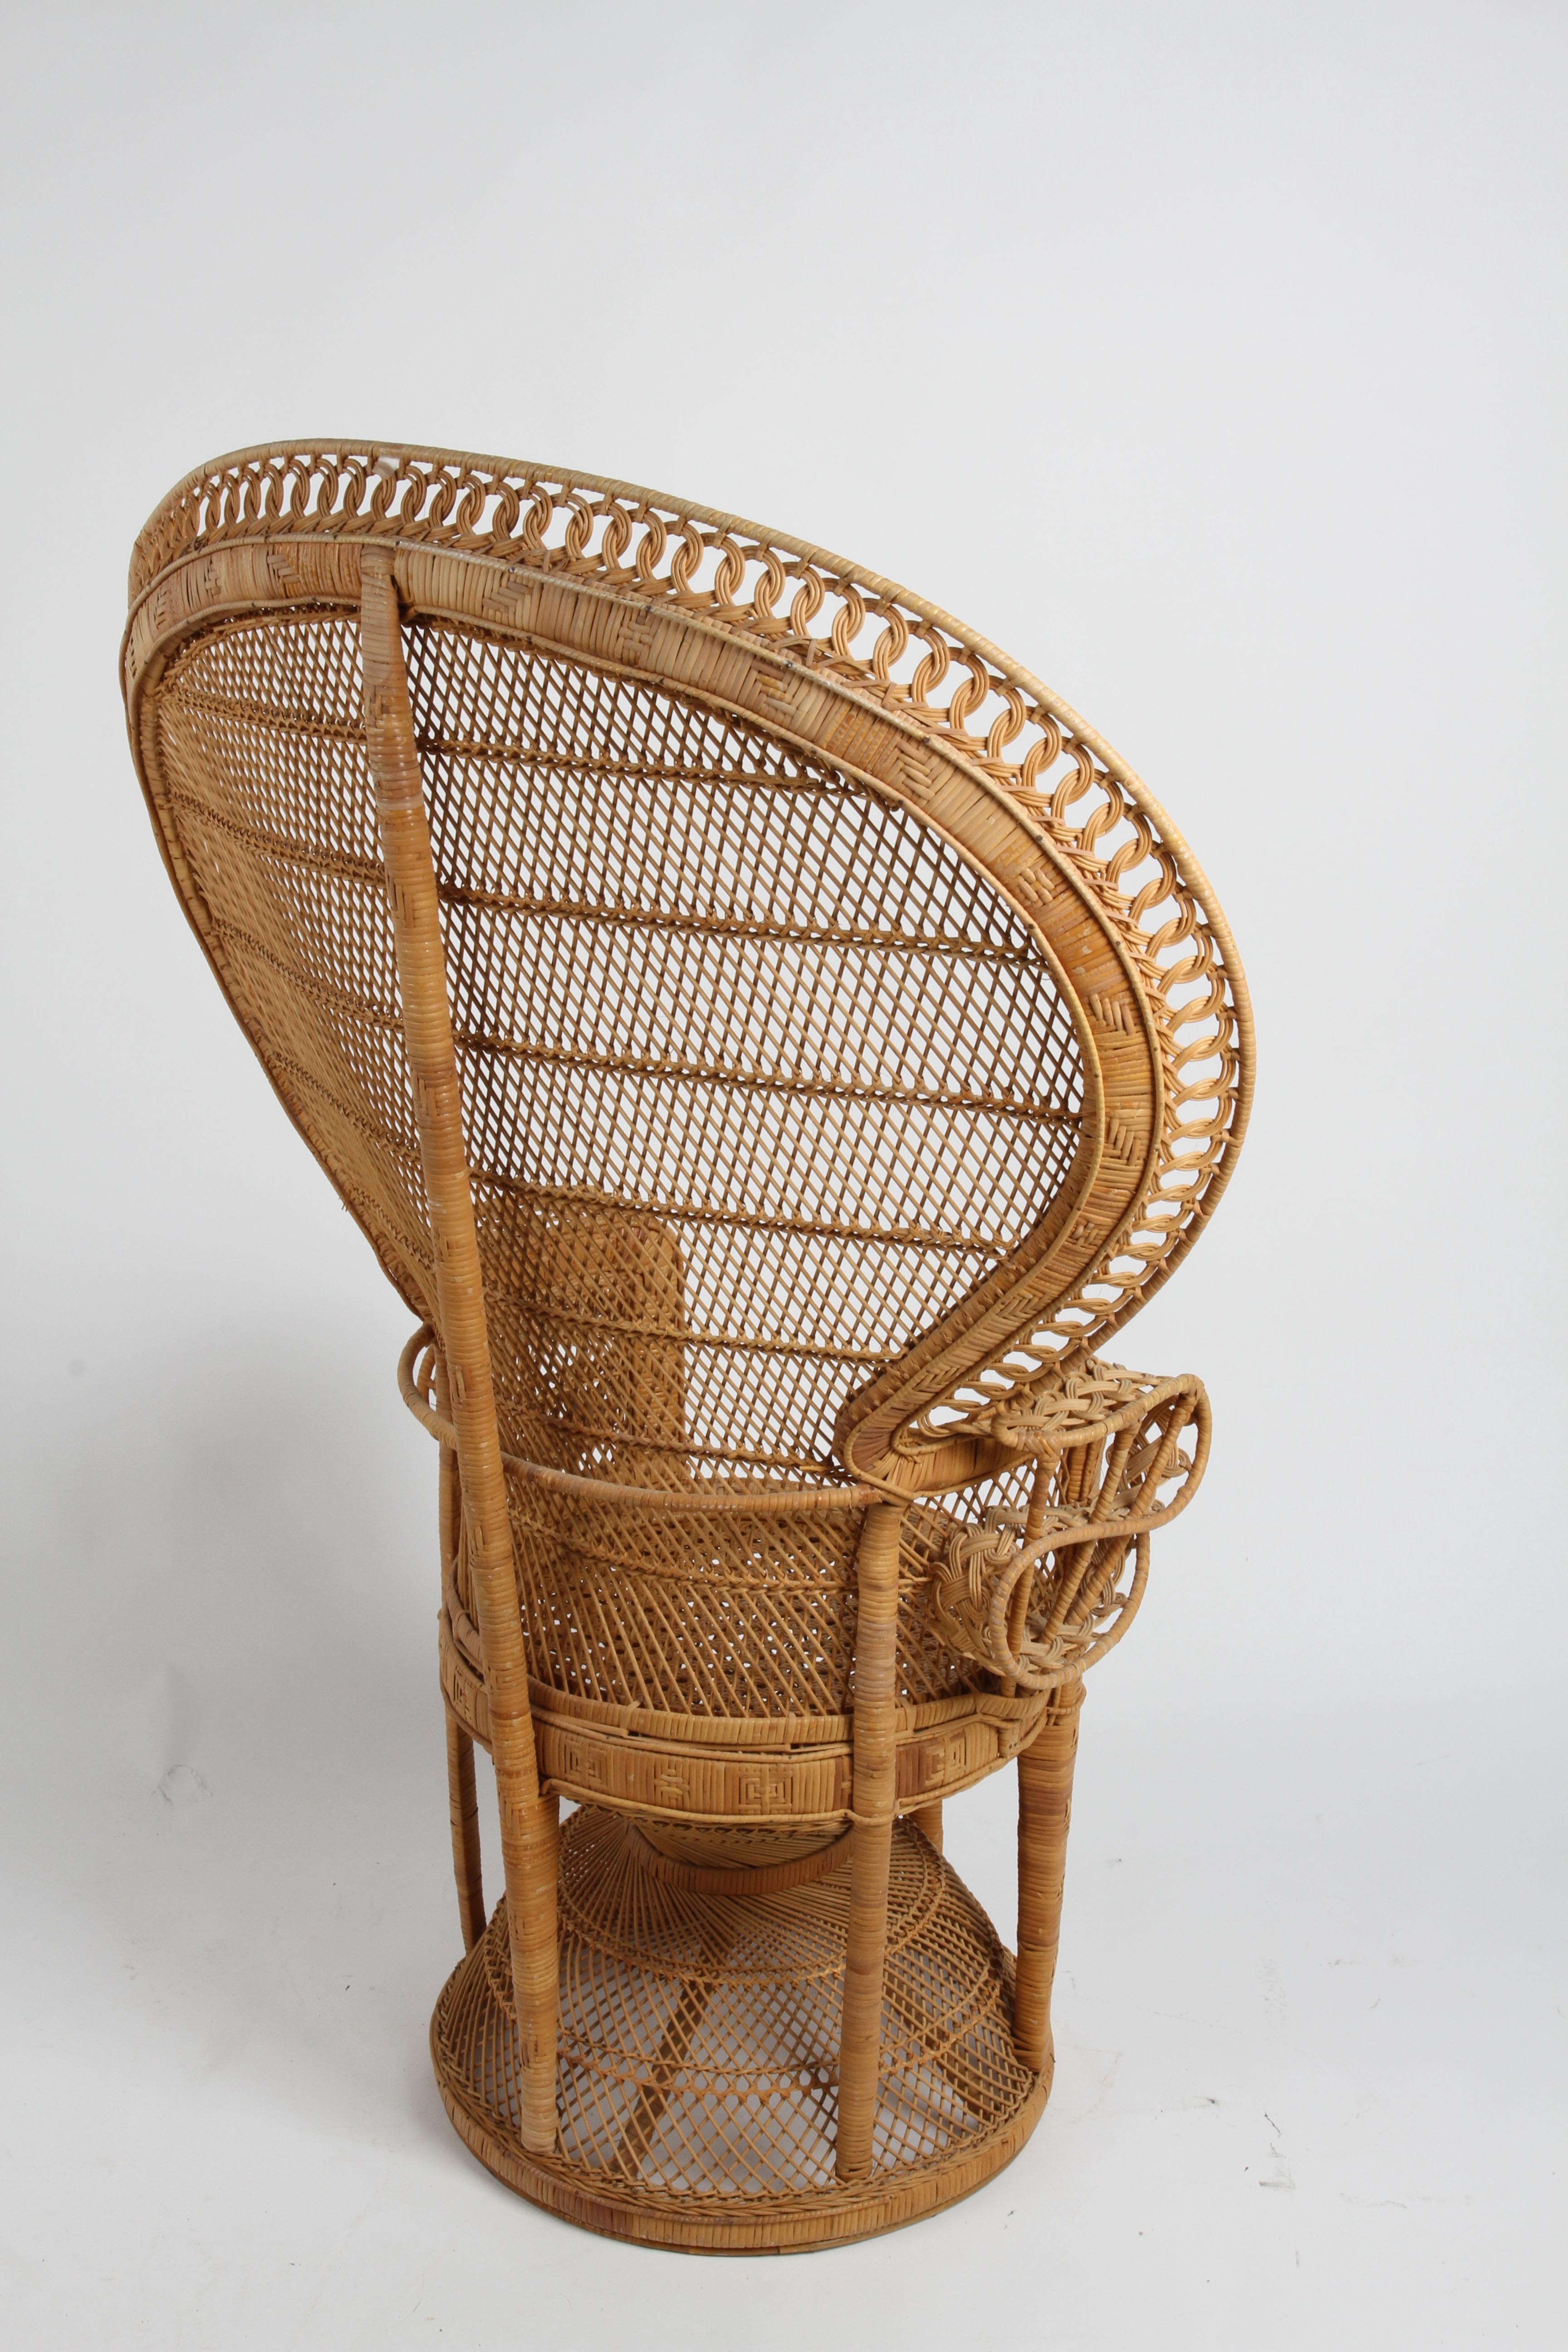 Vintage 1970s Rattan & Wicker Handcrafted Boho Chic Emmanuelle Peacock Chair For Sale 4